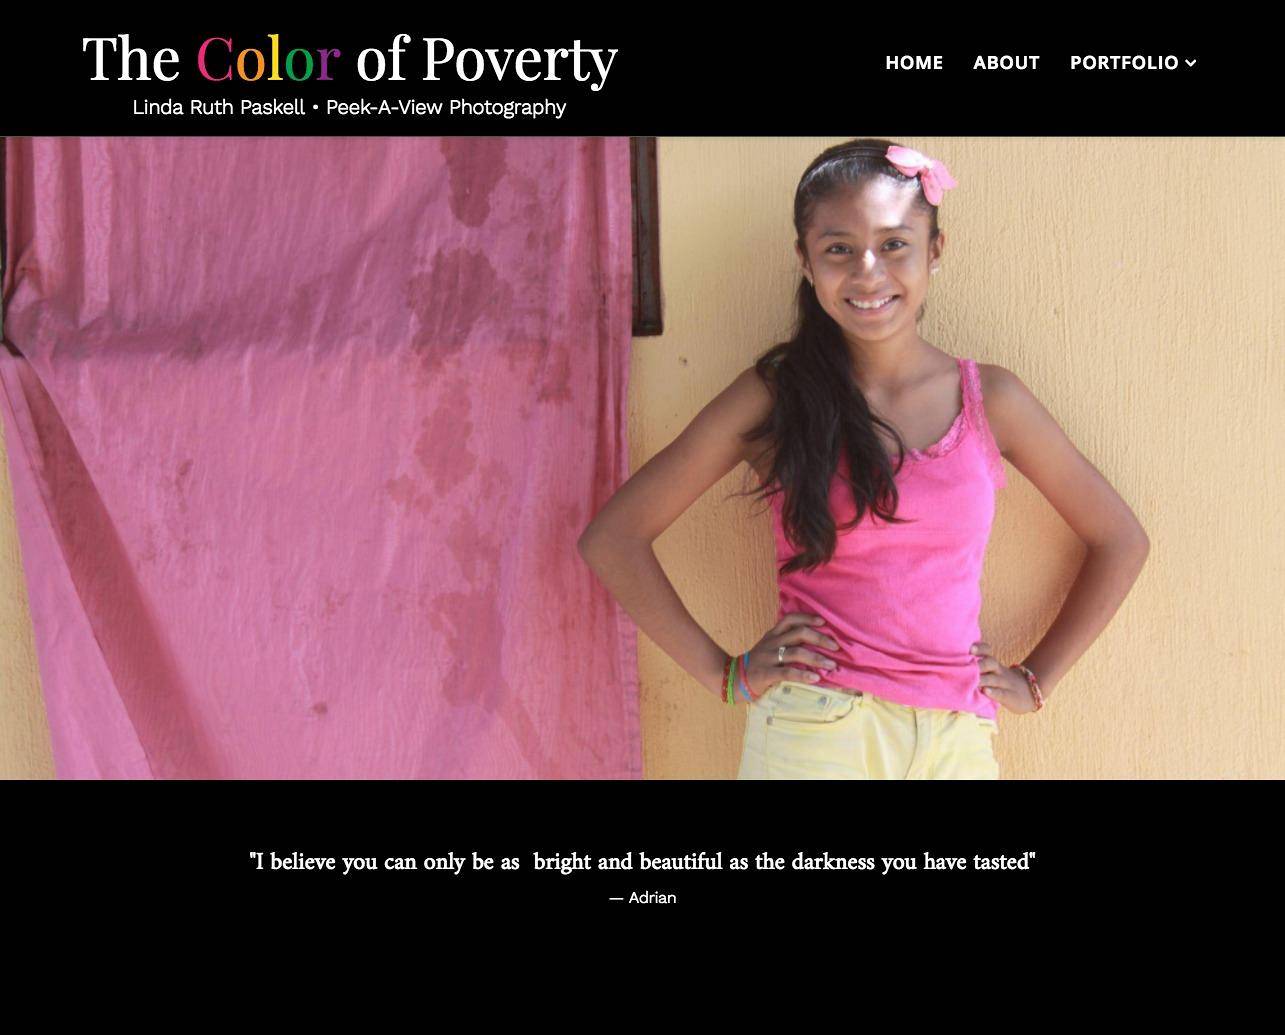 The Color of Poverty